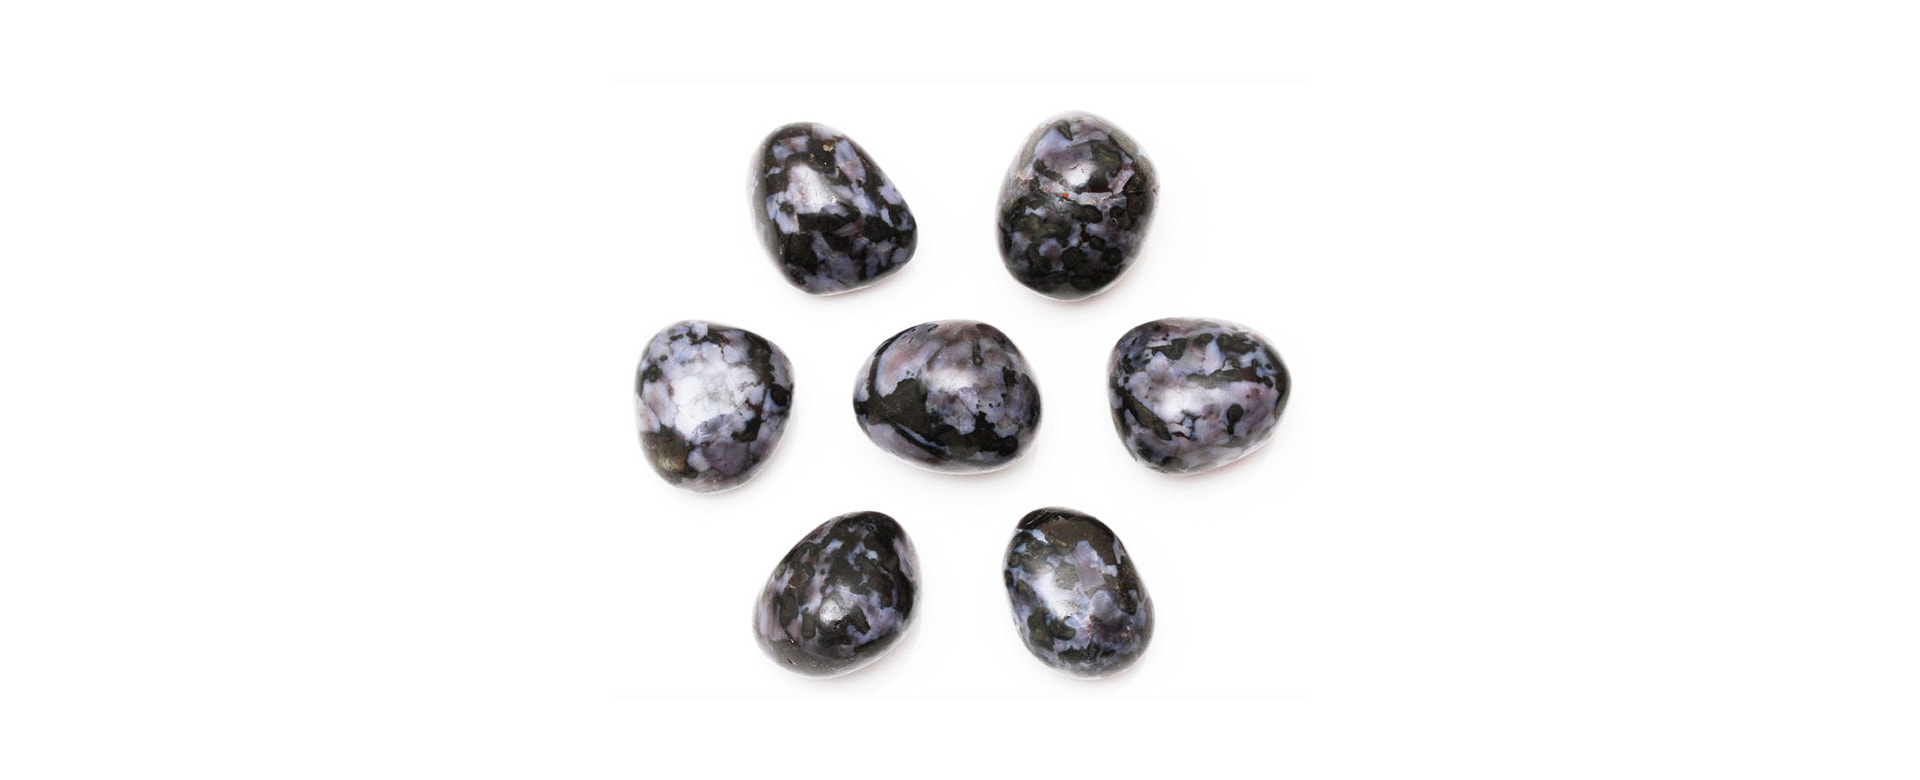 Mystic Merlinite Meaning and Properties 1